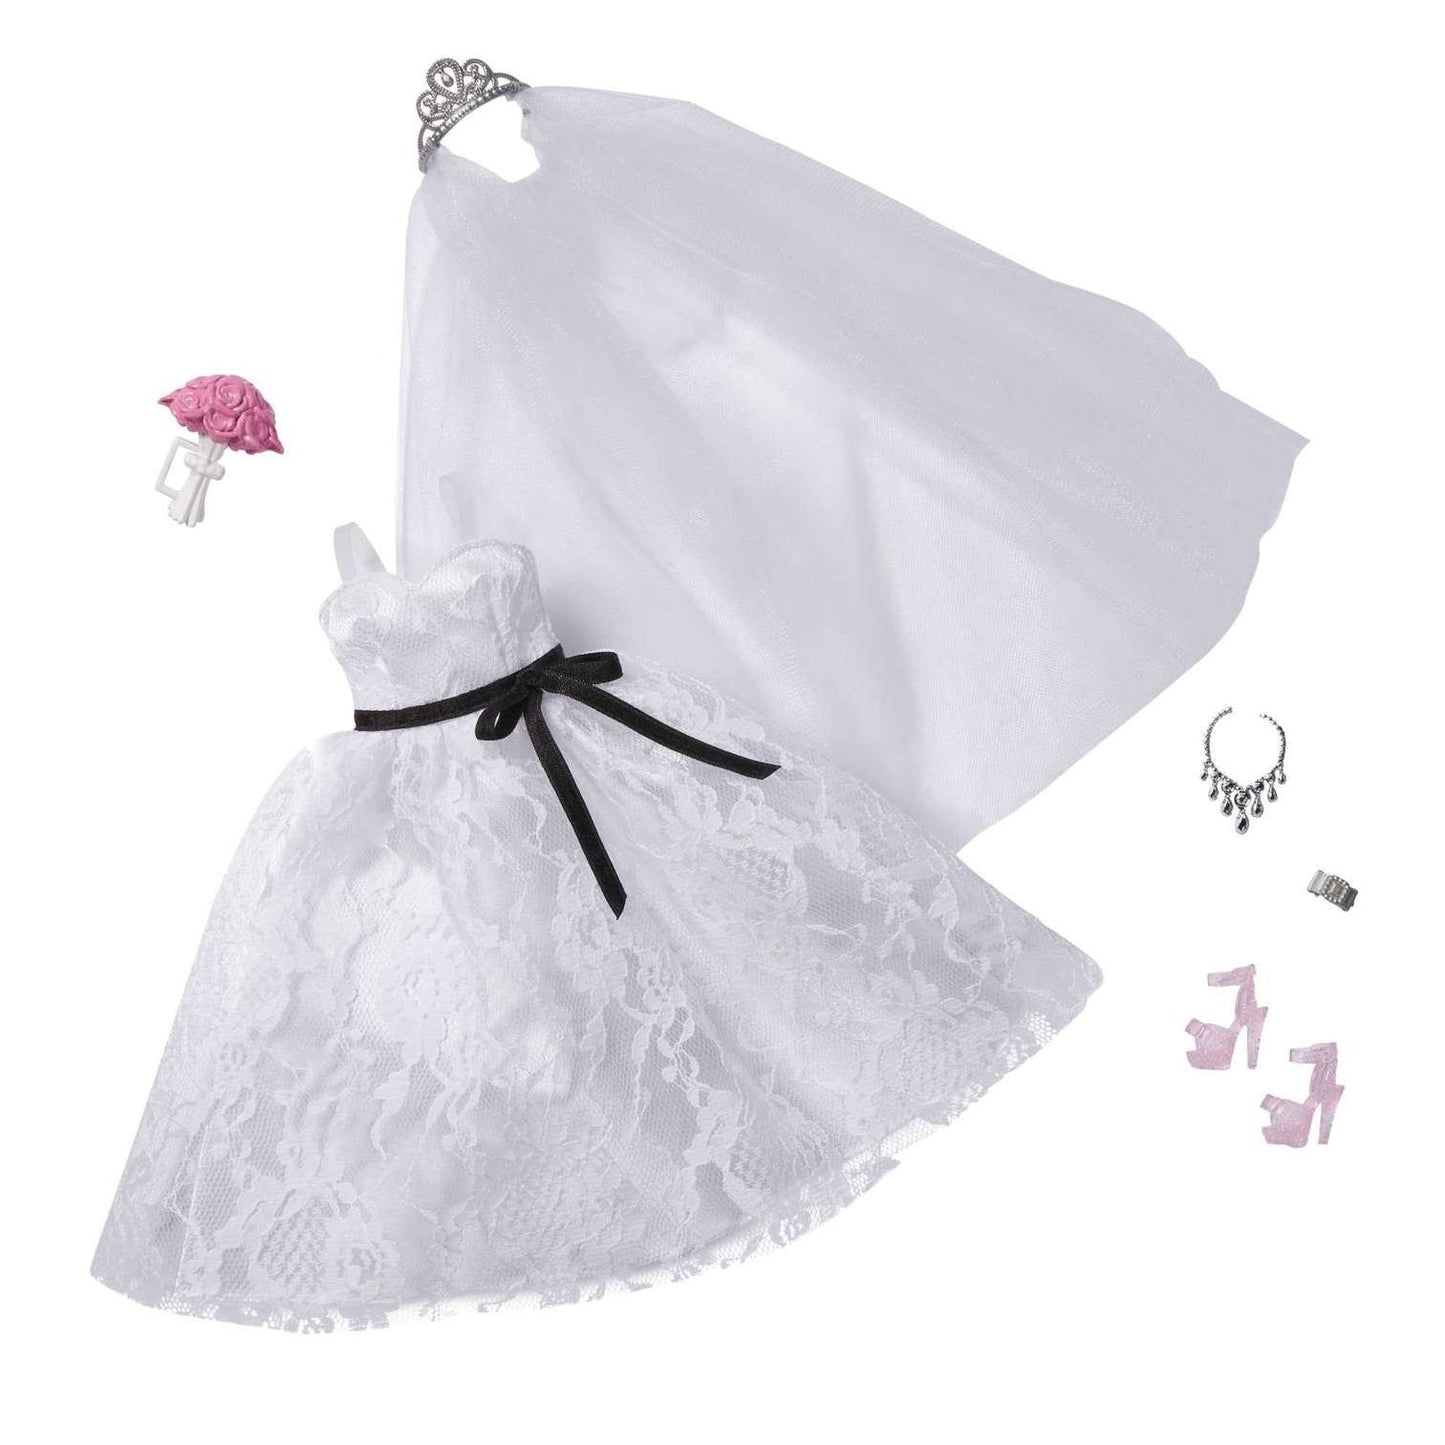 Barbie Fashion Pack: Bridal Outfit For Barbie Doll Wedding Dress & Accessories